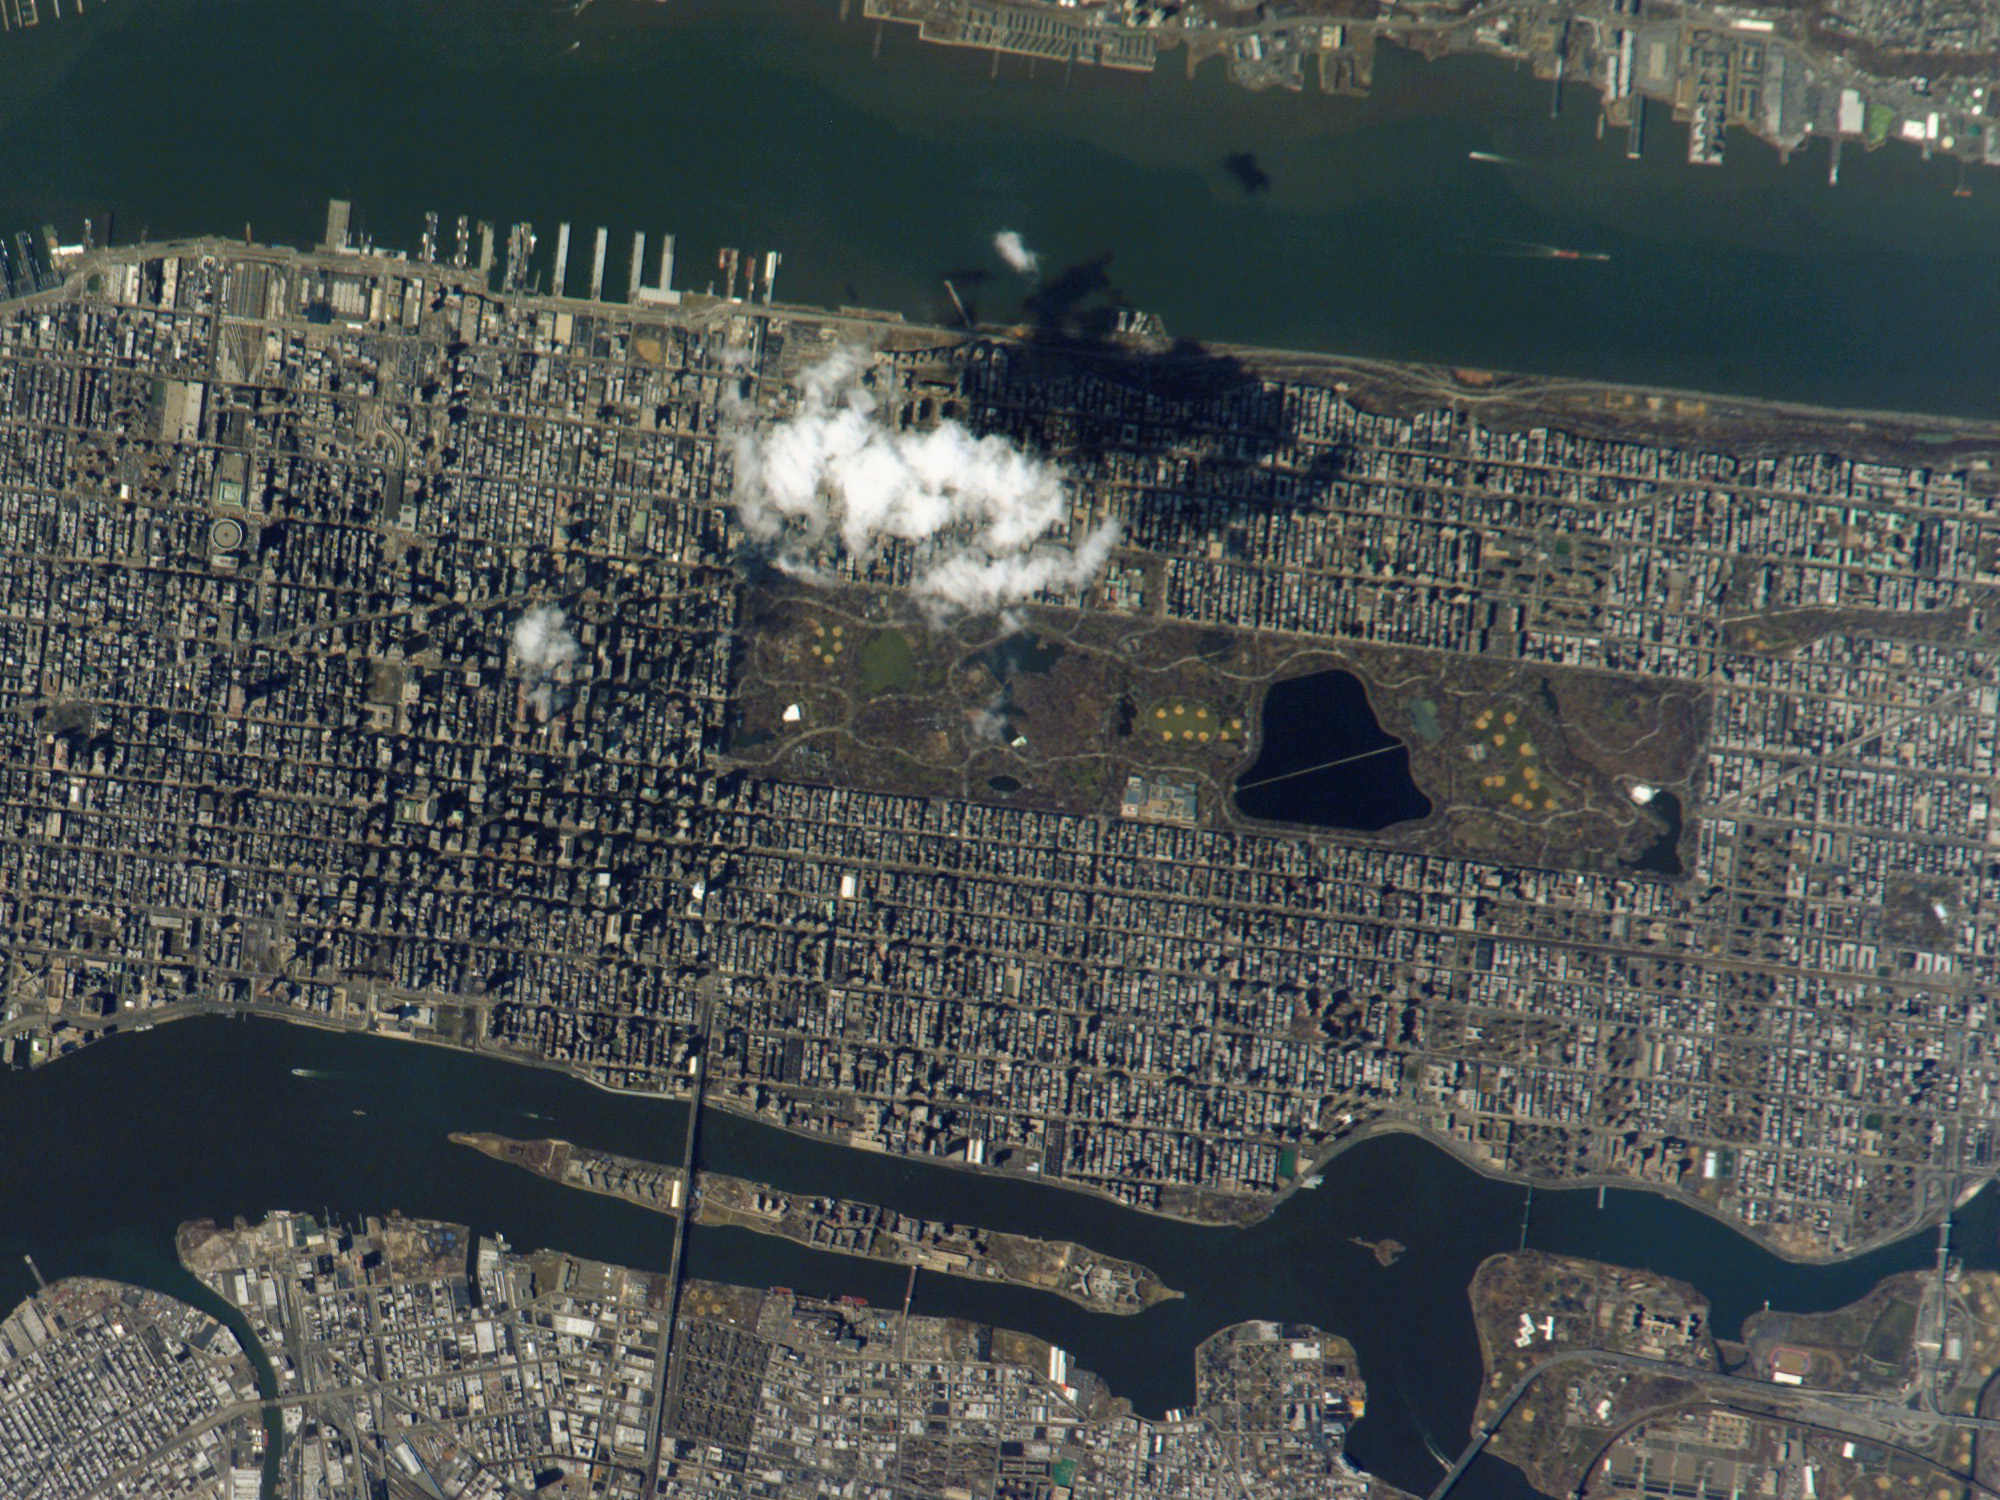 Photo of Manhattan, NYC, taken from the ISS during mission 10. NASA/GISS barely visible as one of many buildings just to the right and up from Central Park.